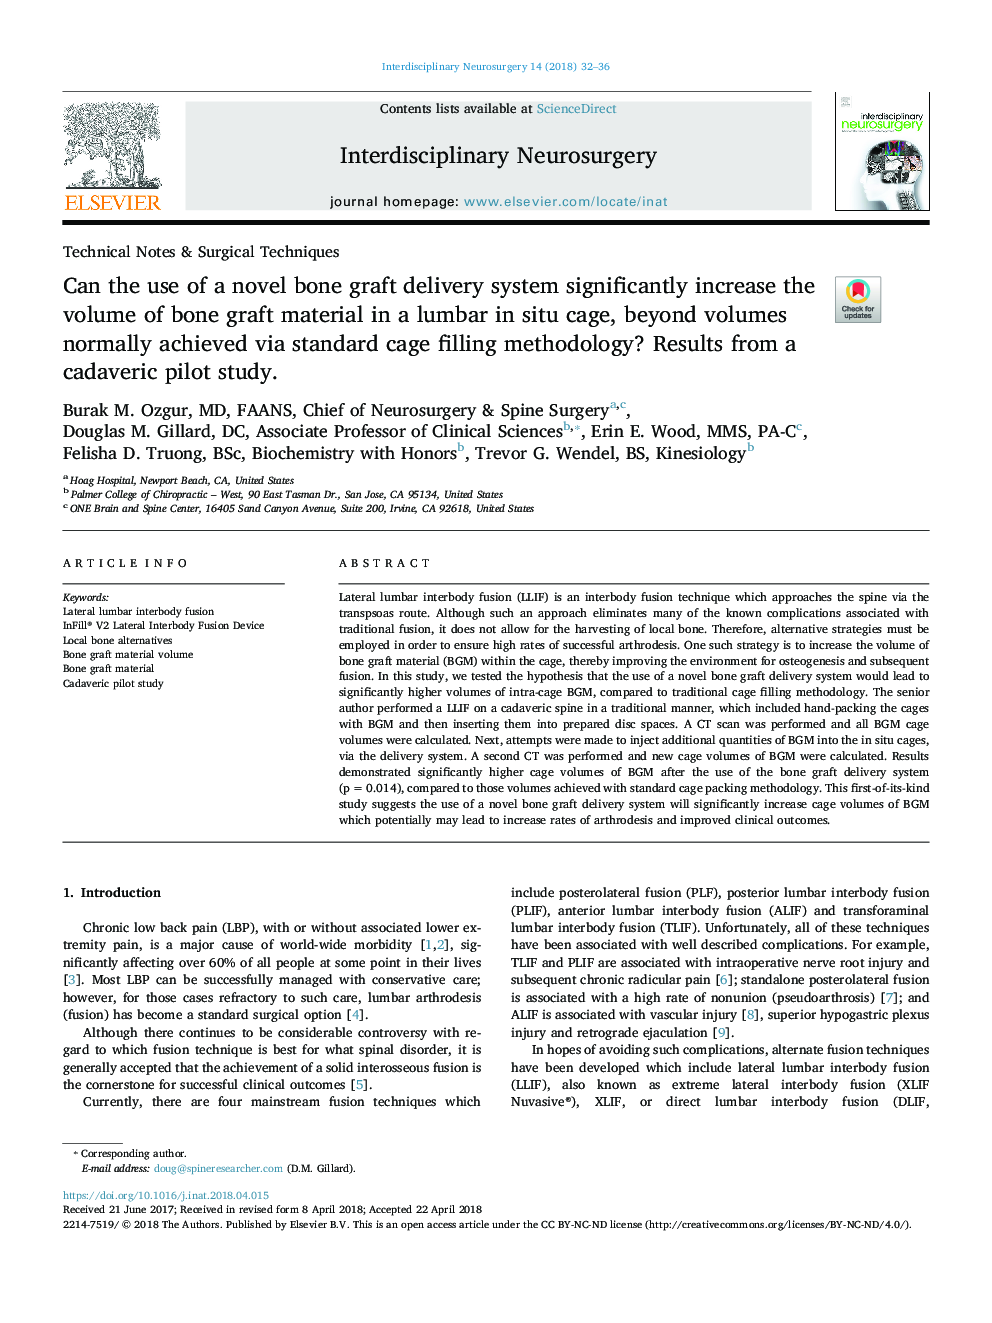 Can the use of a novel bone graft delivery system significantly increase the volume of bone graft material in a lumbar in situ cage, beyond volumes normally achieved via standard cage filling methodology? Results from a cadaveric pilot study.